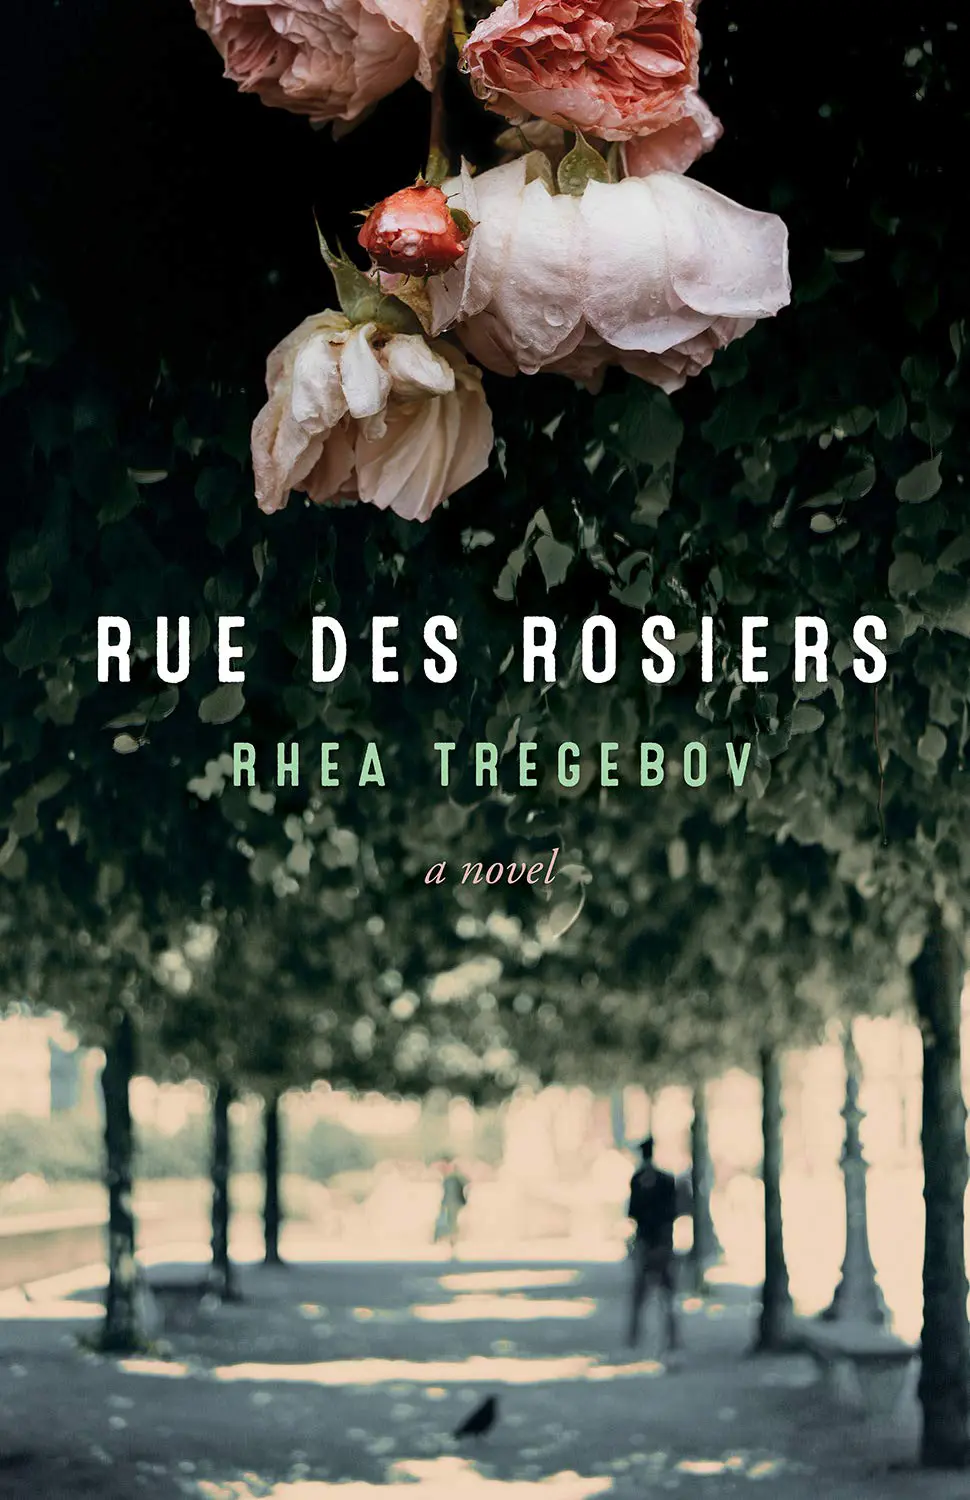 Rue des Rosiers book cover image and purchase link